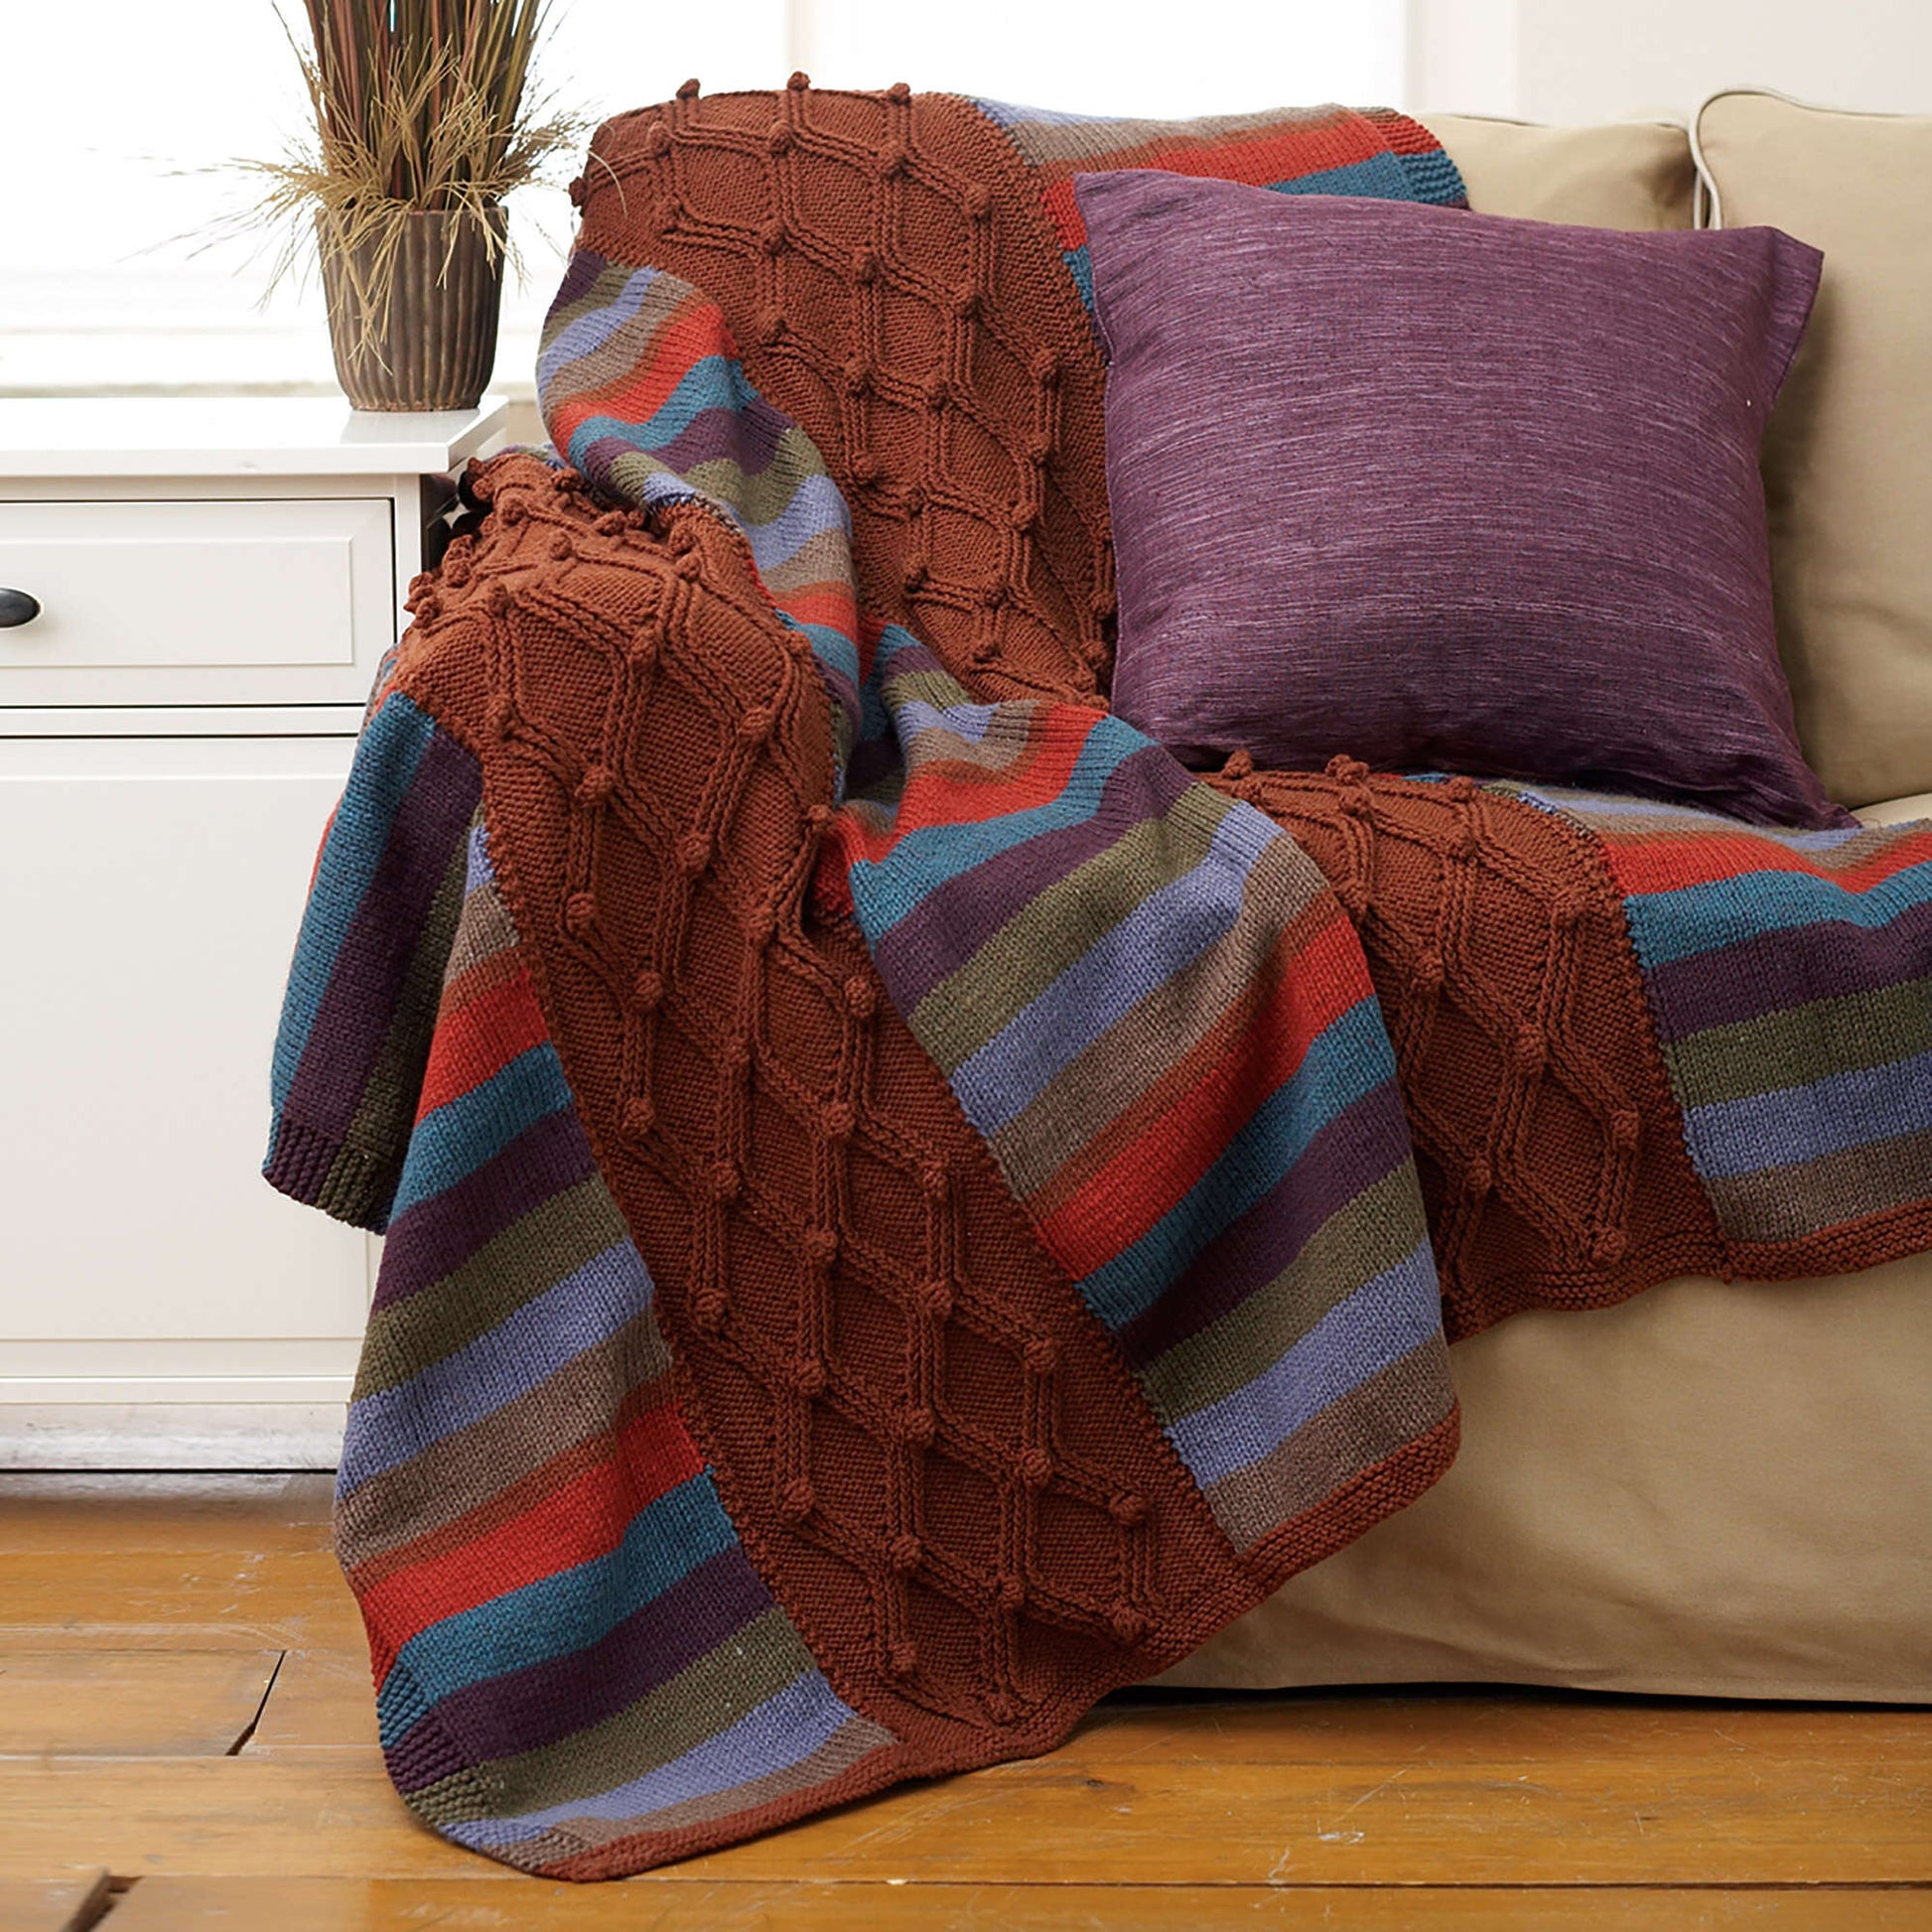 Free Bernat Stripes And Cables Afghan Knit Pattern